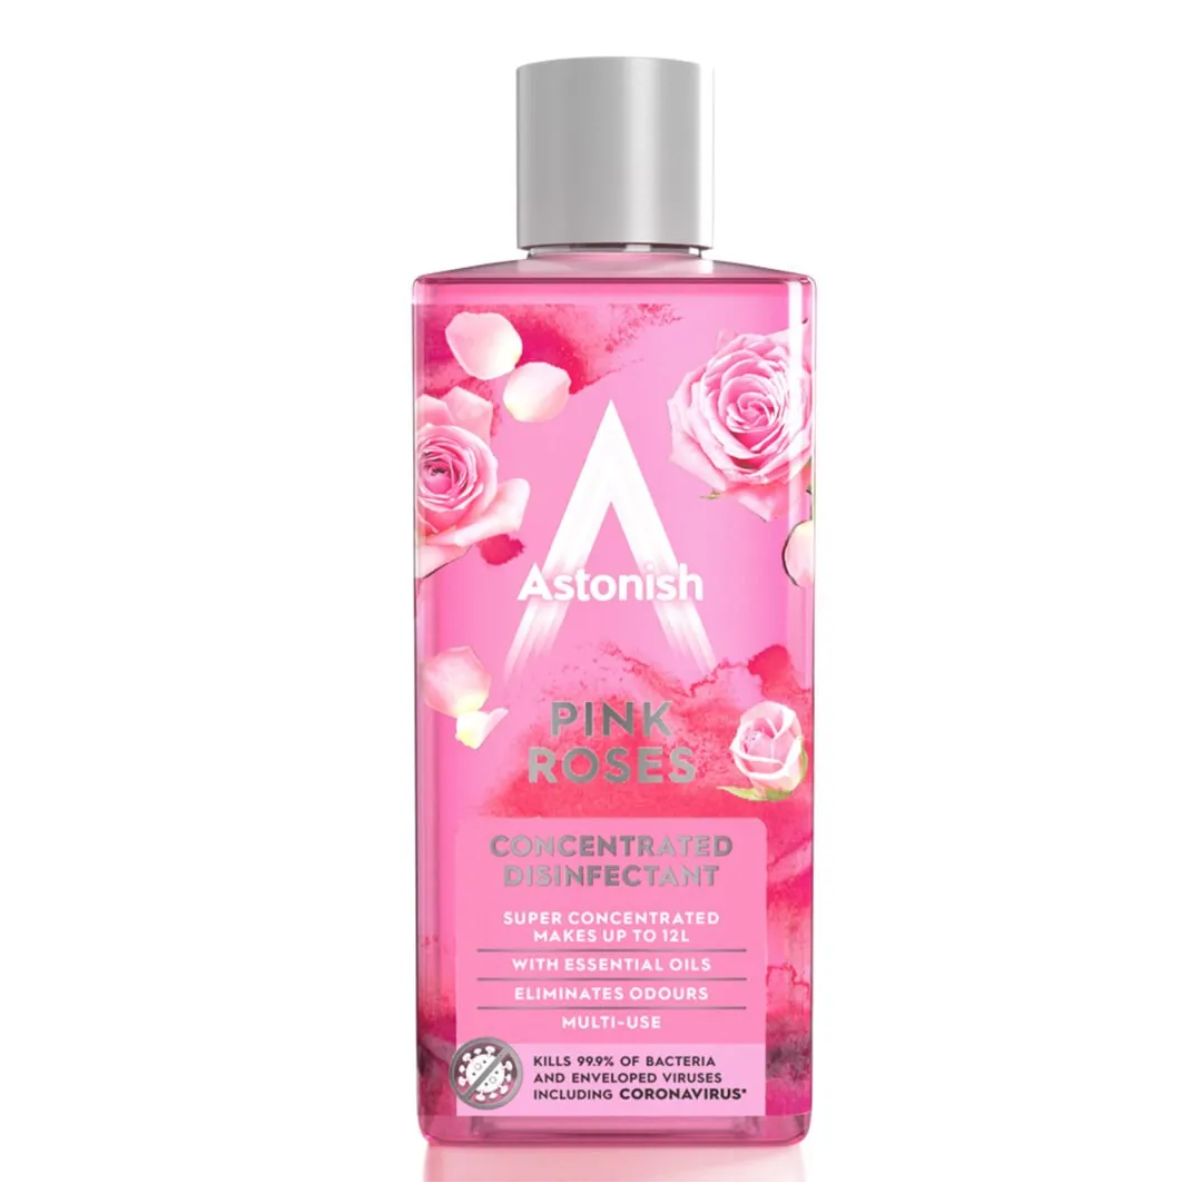 A bottle of Astonish - Disinfectant Pink Roses - 300ml body wash on a white background.